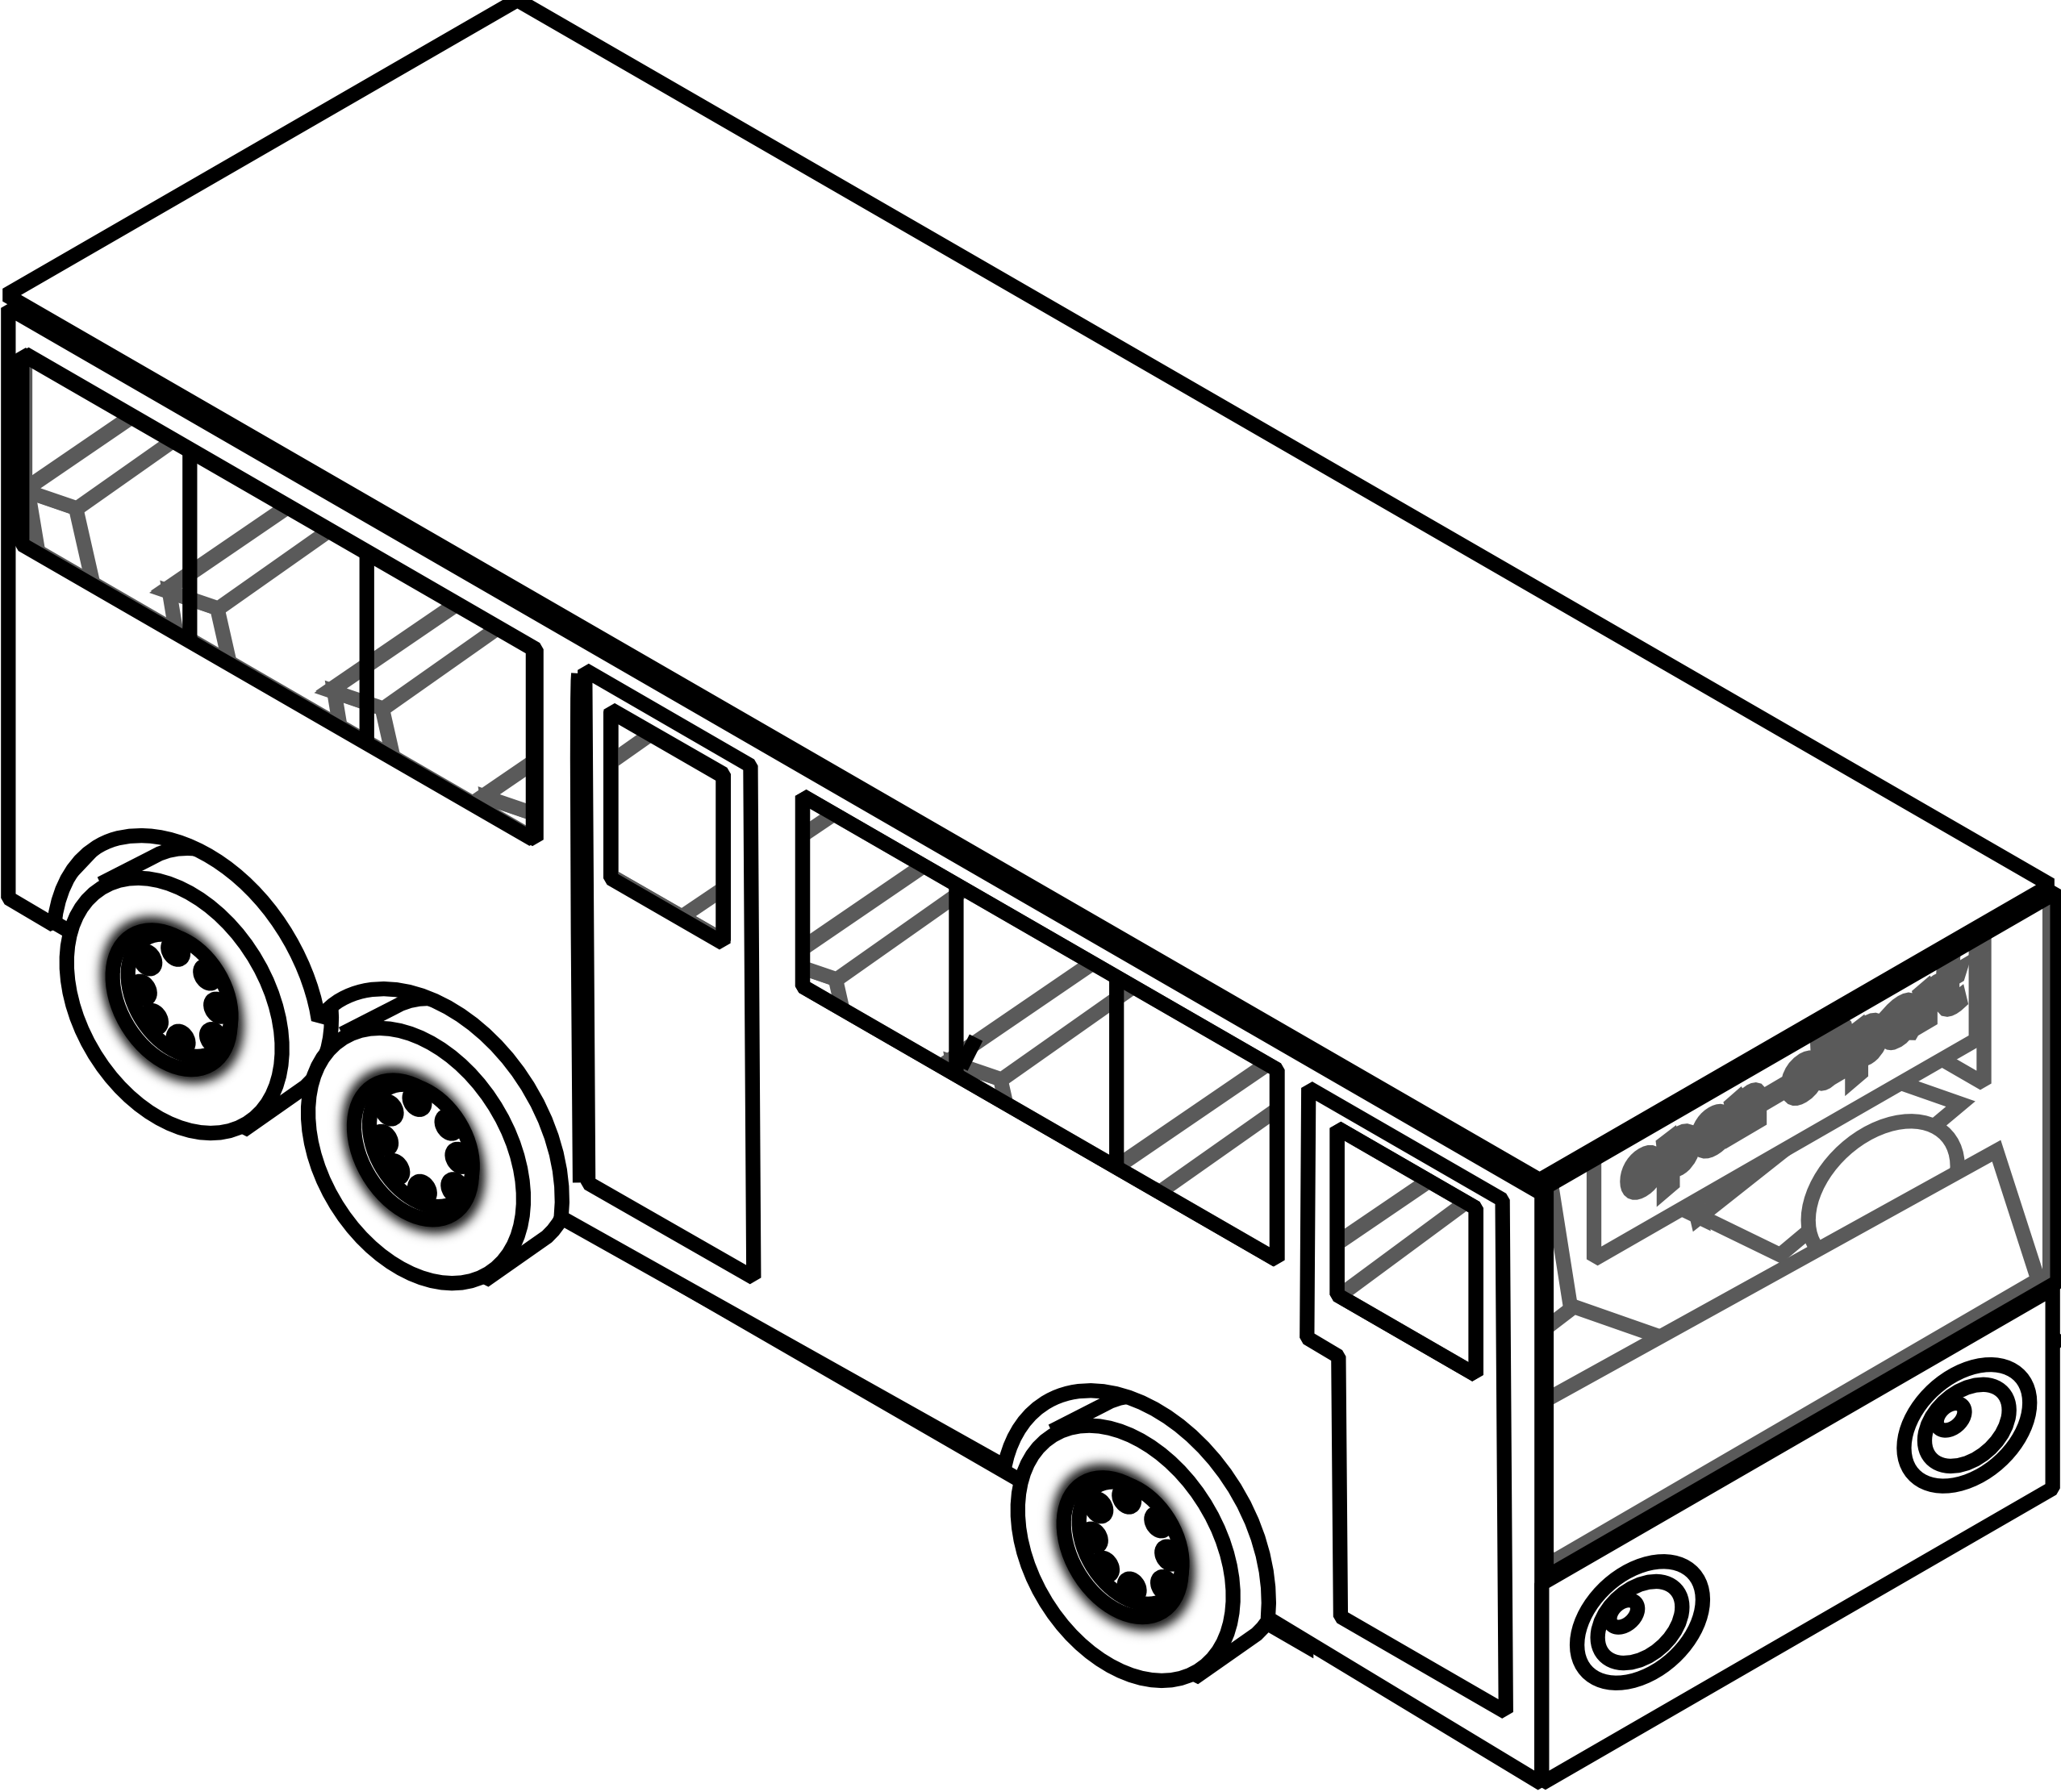 School Bus Black And White Clipart